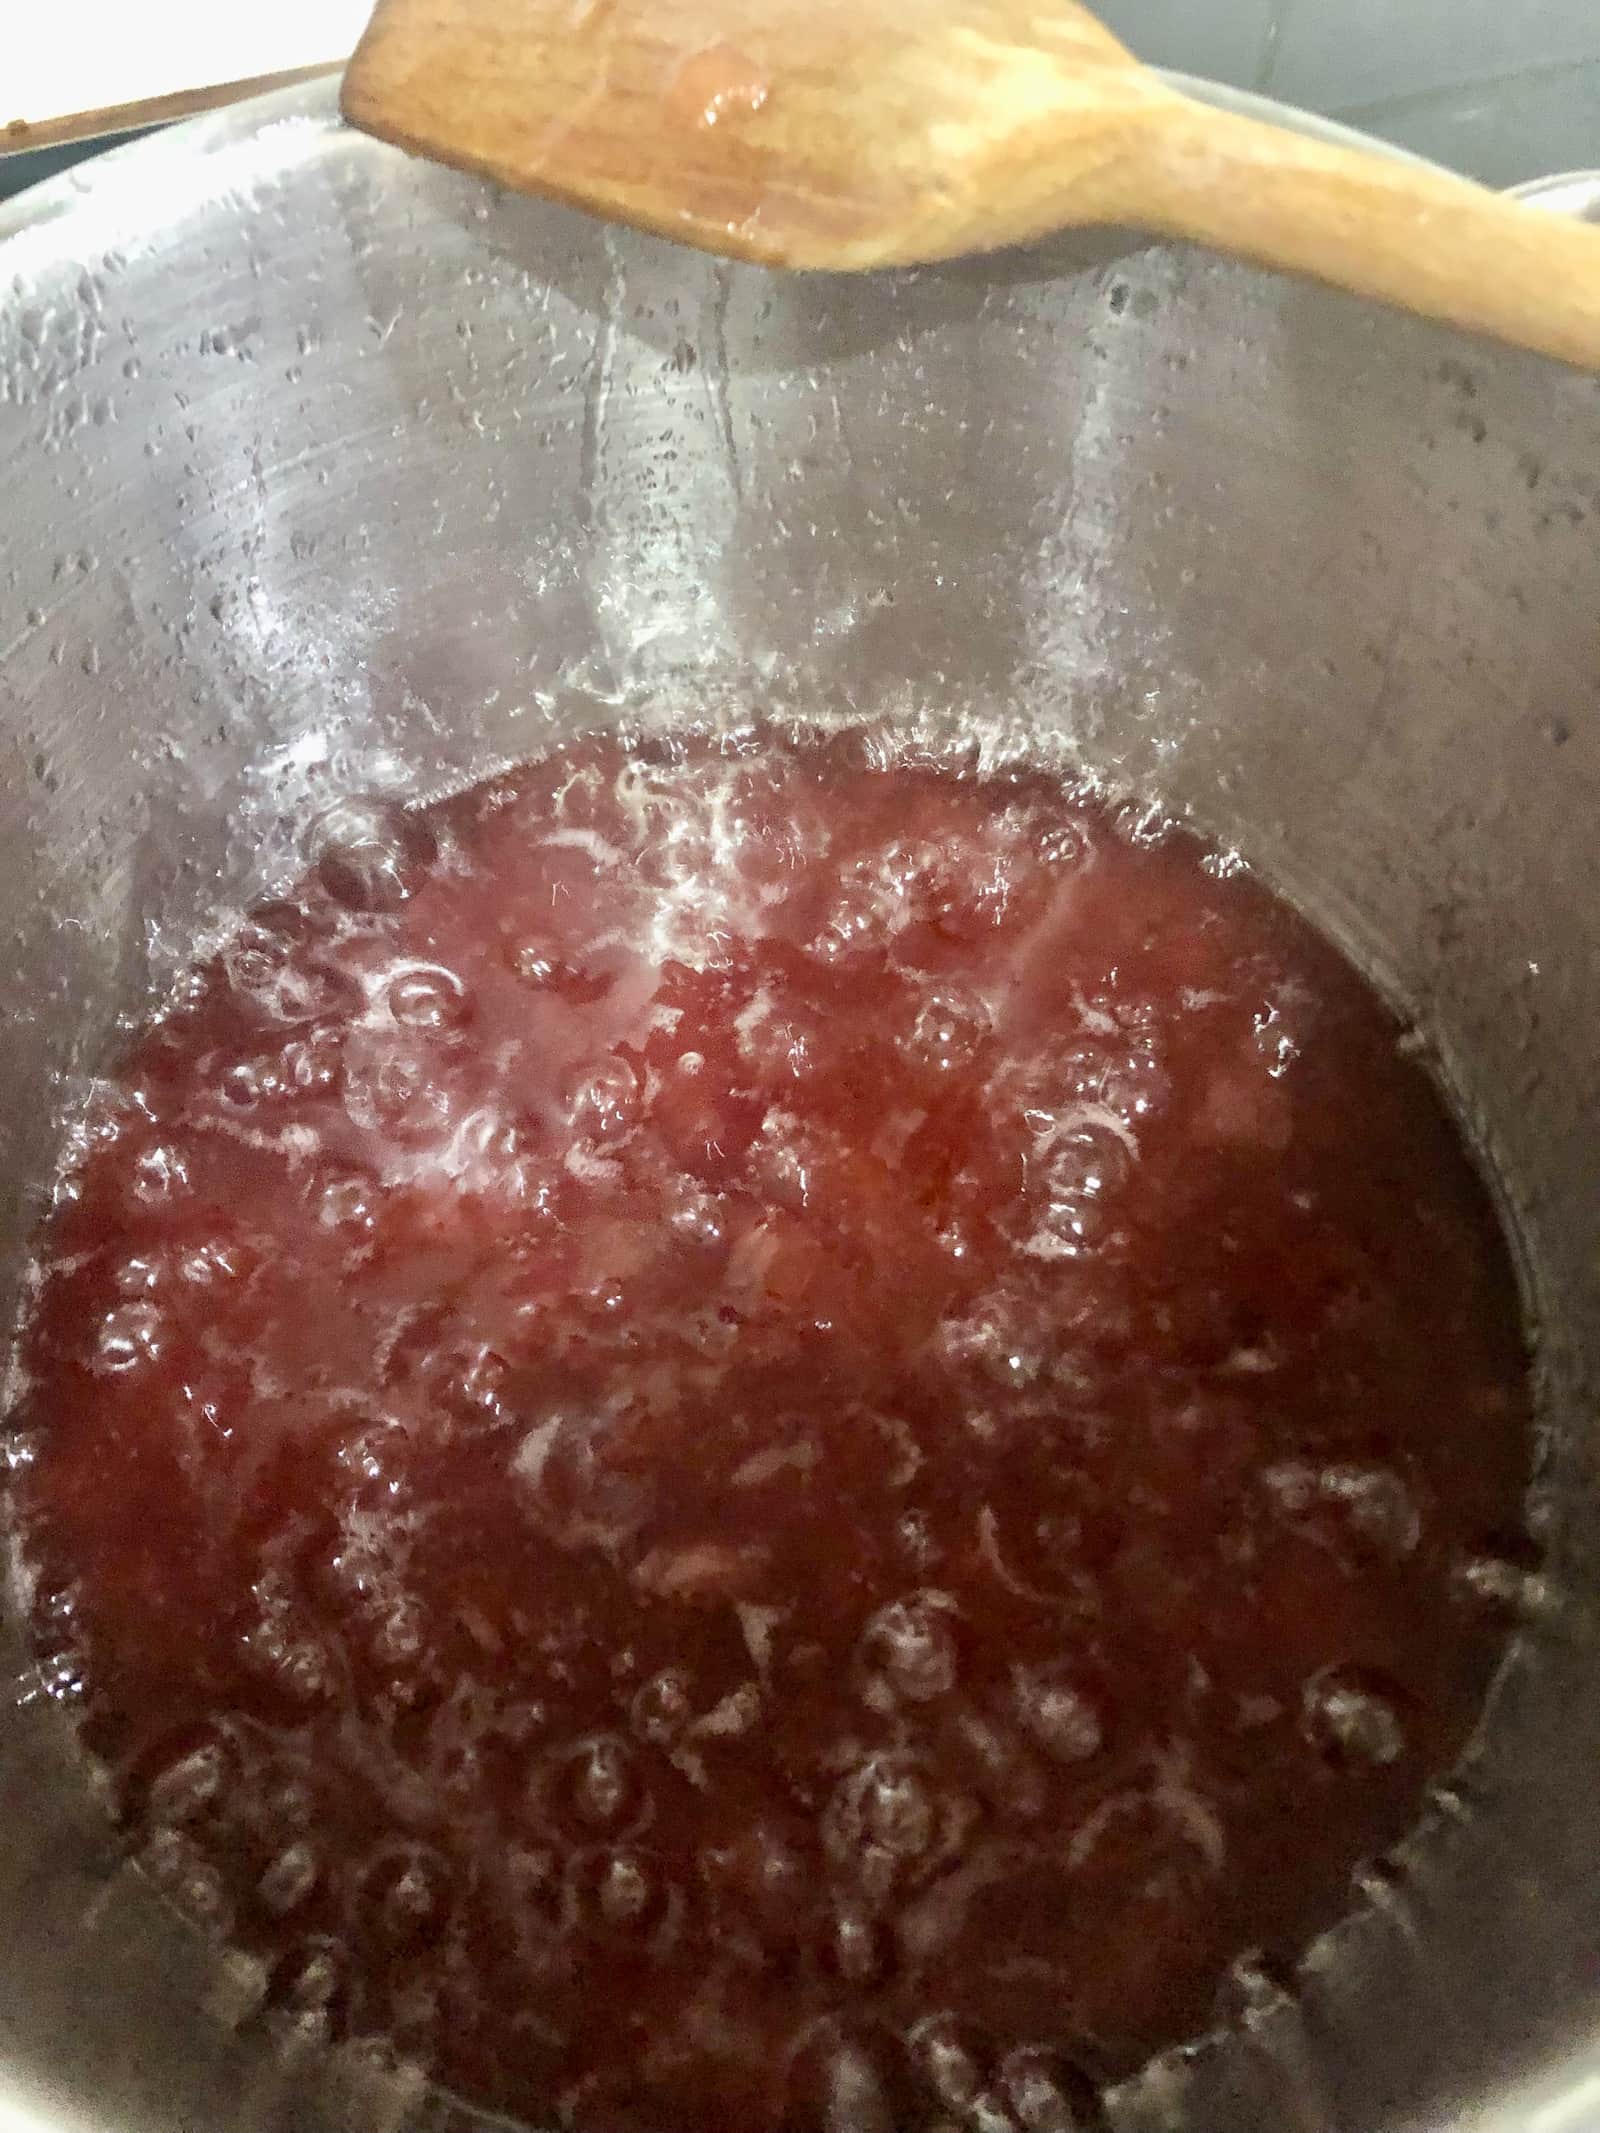 Rhubarb and ginger jam being boiled in a large saucepan